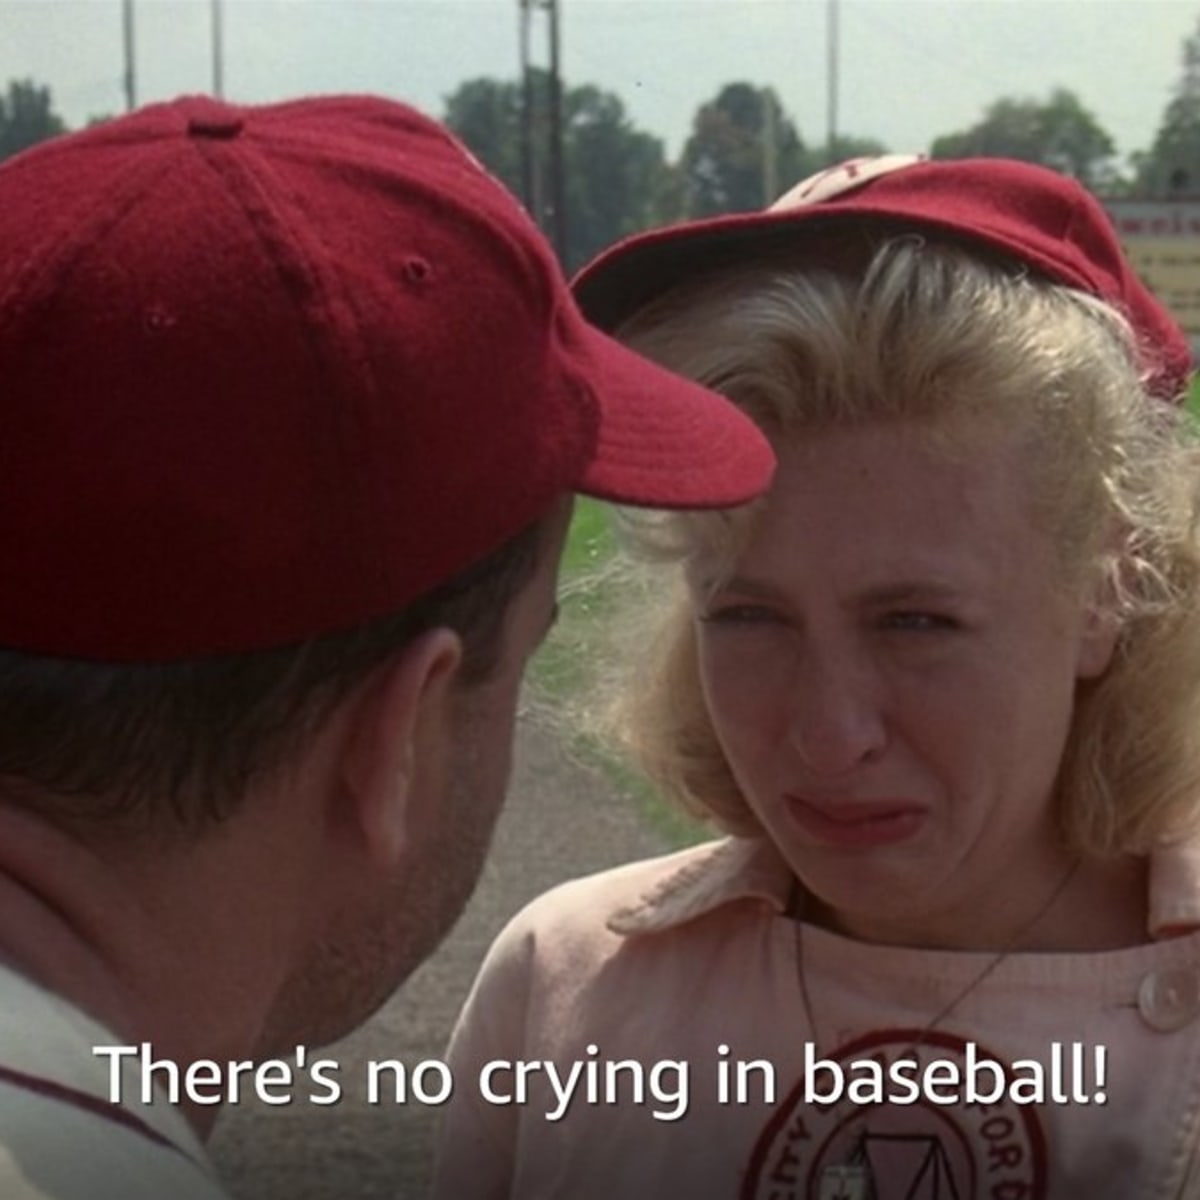 A League of Their Own' Turns 30: Writers on 'No Crying in Baseball!